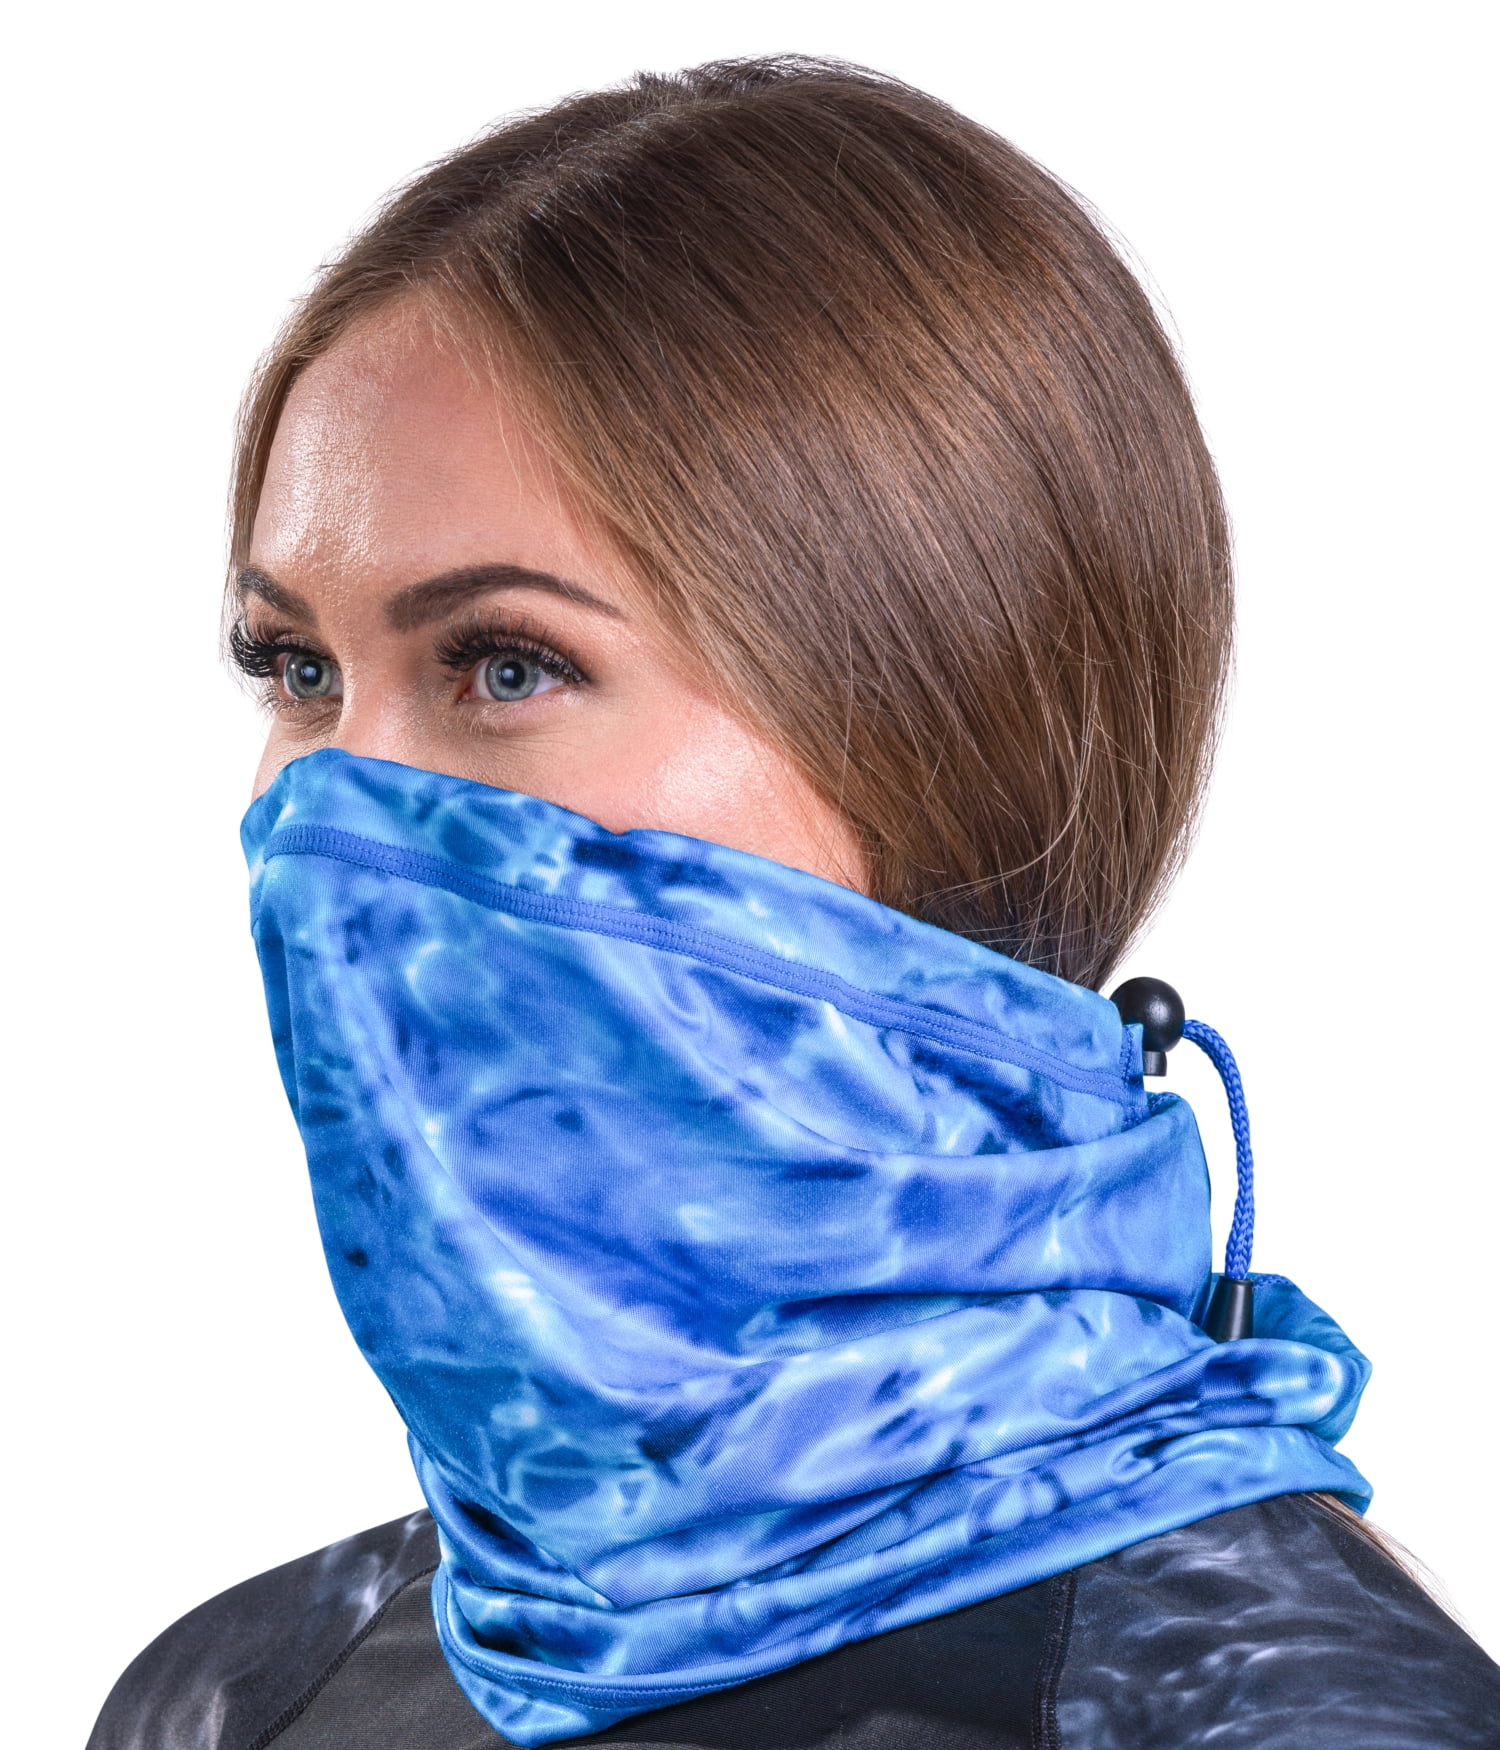 TEELONG Ear Hangers Bandana Face Mask Women Men Sunflower Print Cooling Neck Gaiter Outdoor Sports Tube Scarf Breathable Face Covering Washable Half Face Covers Cloth